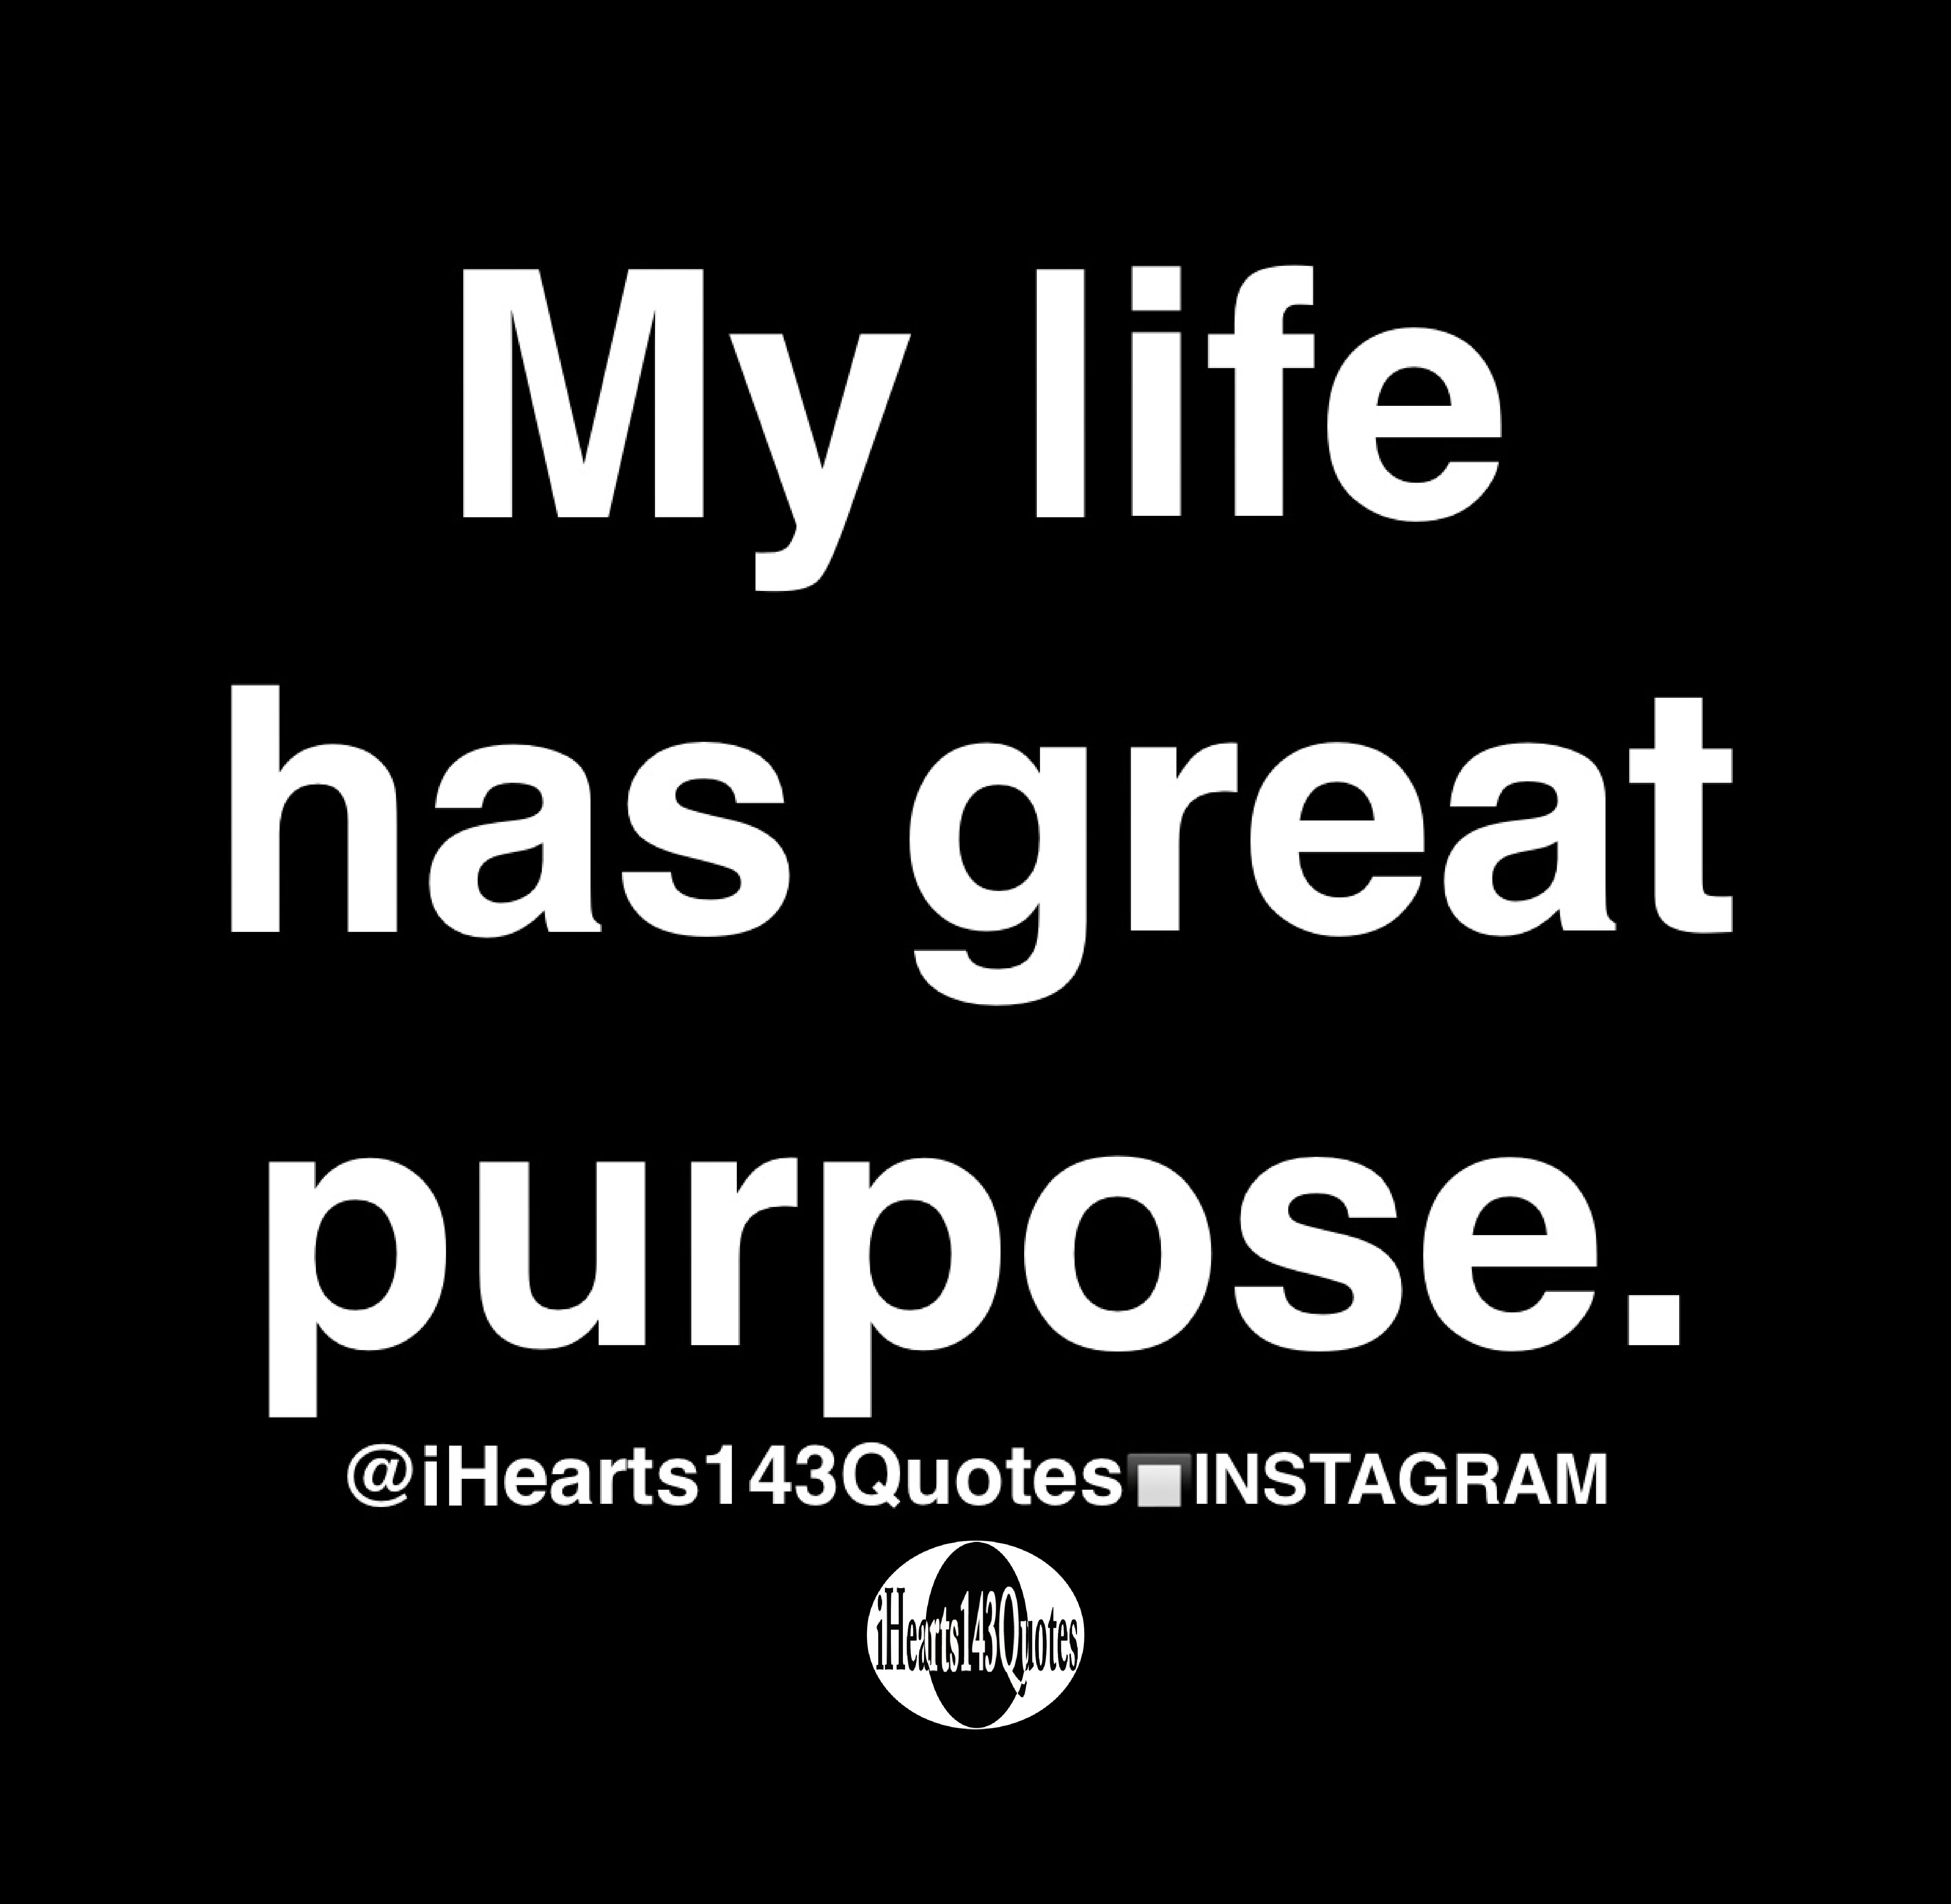 Quotes about purpose in Life. Greater purpose